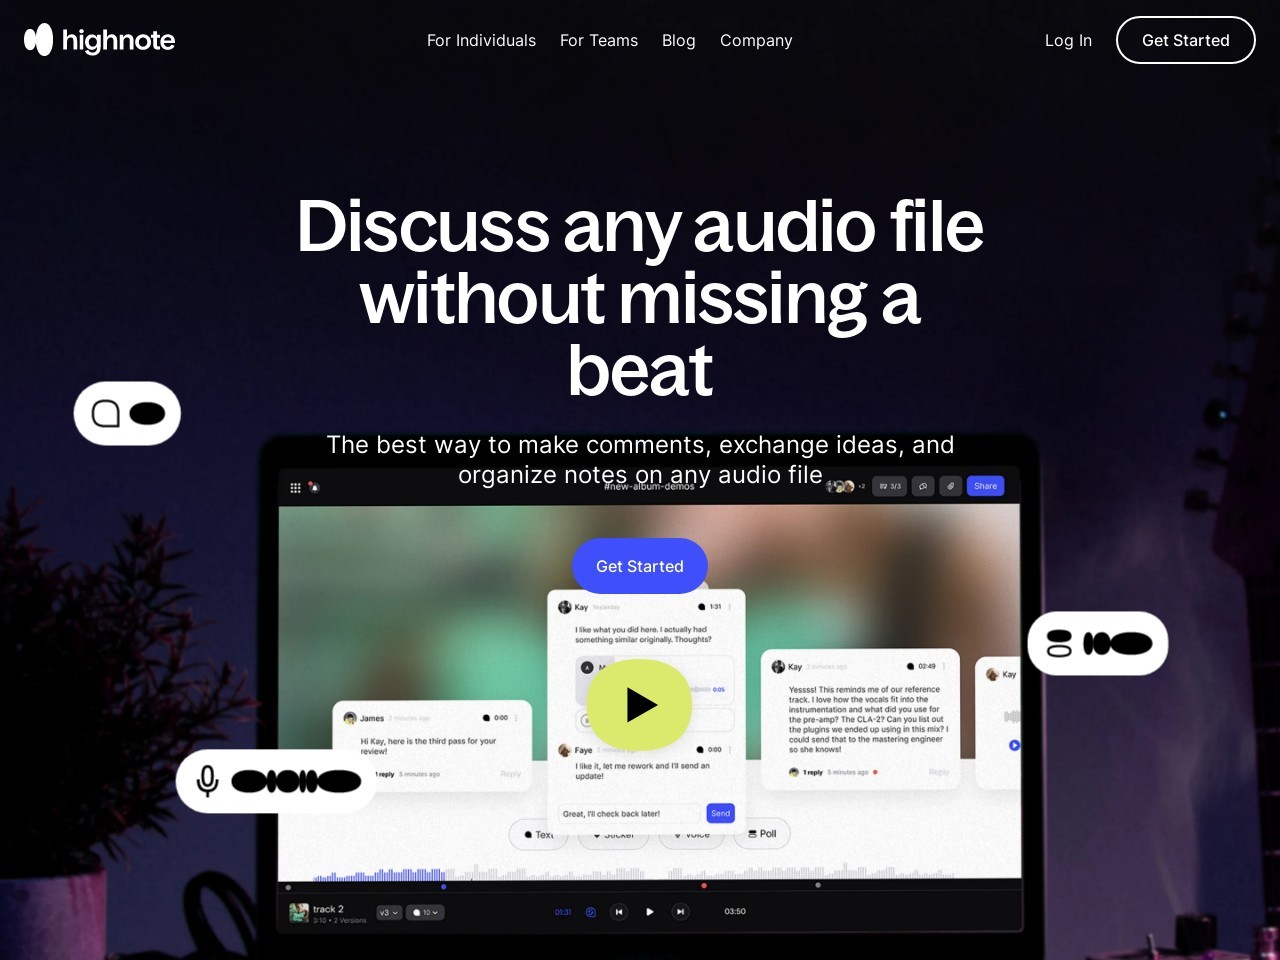 Highnote — The best way to make comments, exchange ideas, and organize notes on any audio file